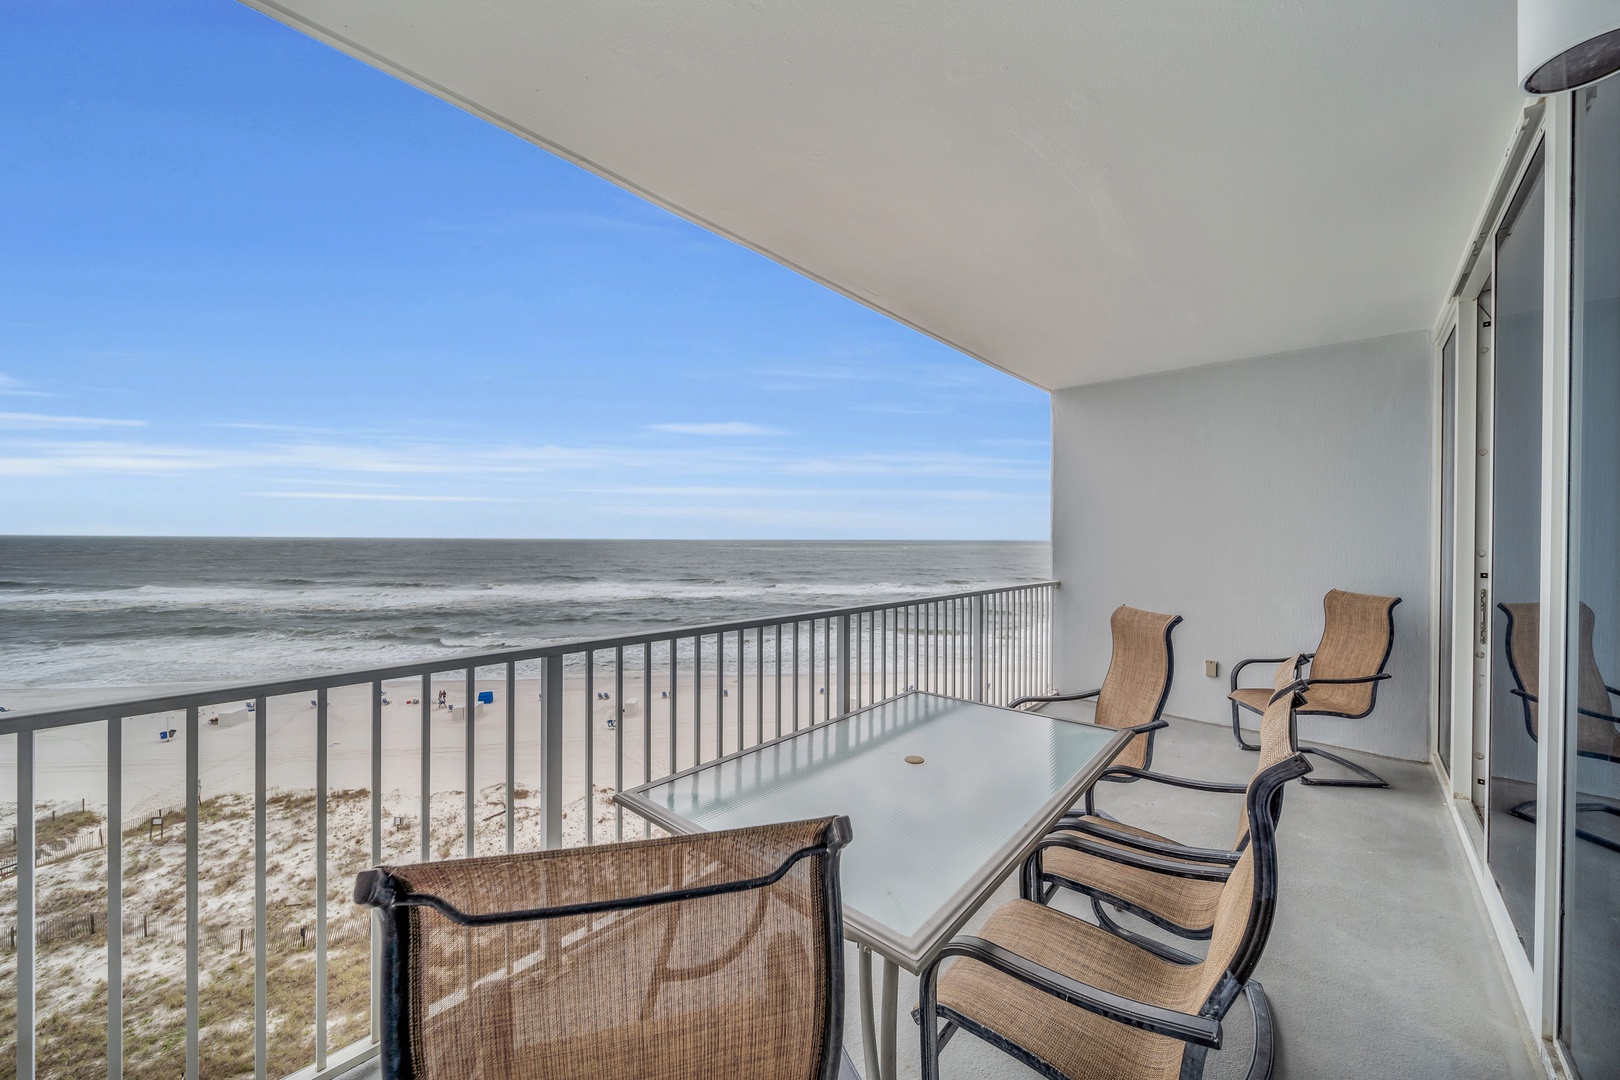 The Balcony offers a panoramic view of the Beautiful Blue-Green waters of the Gulf of Mexico and the White Sugar Beaches of Gulf Shores.